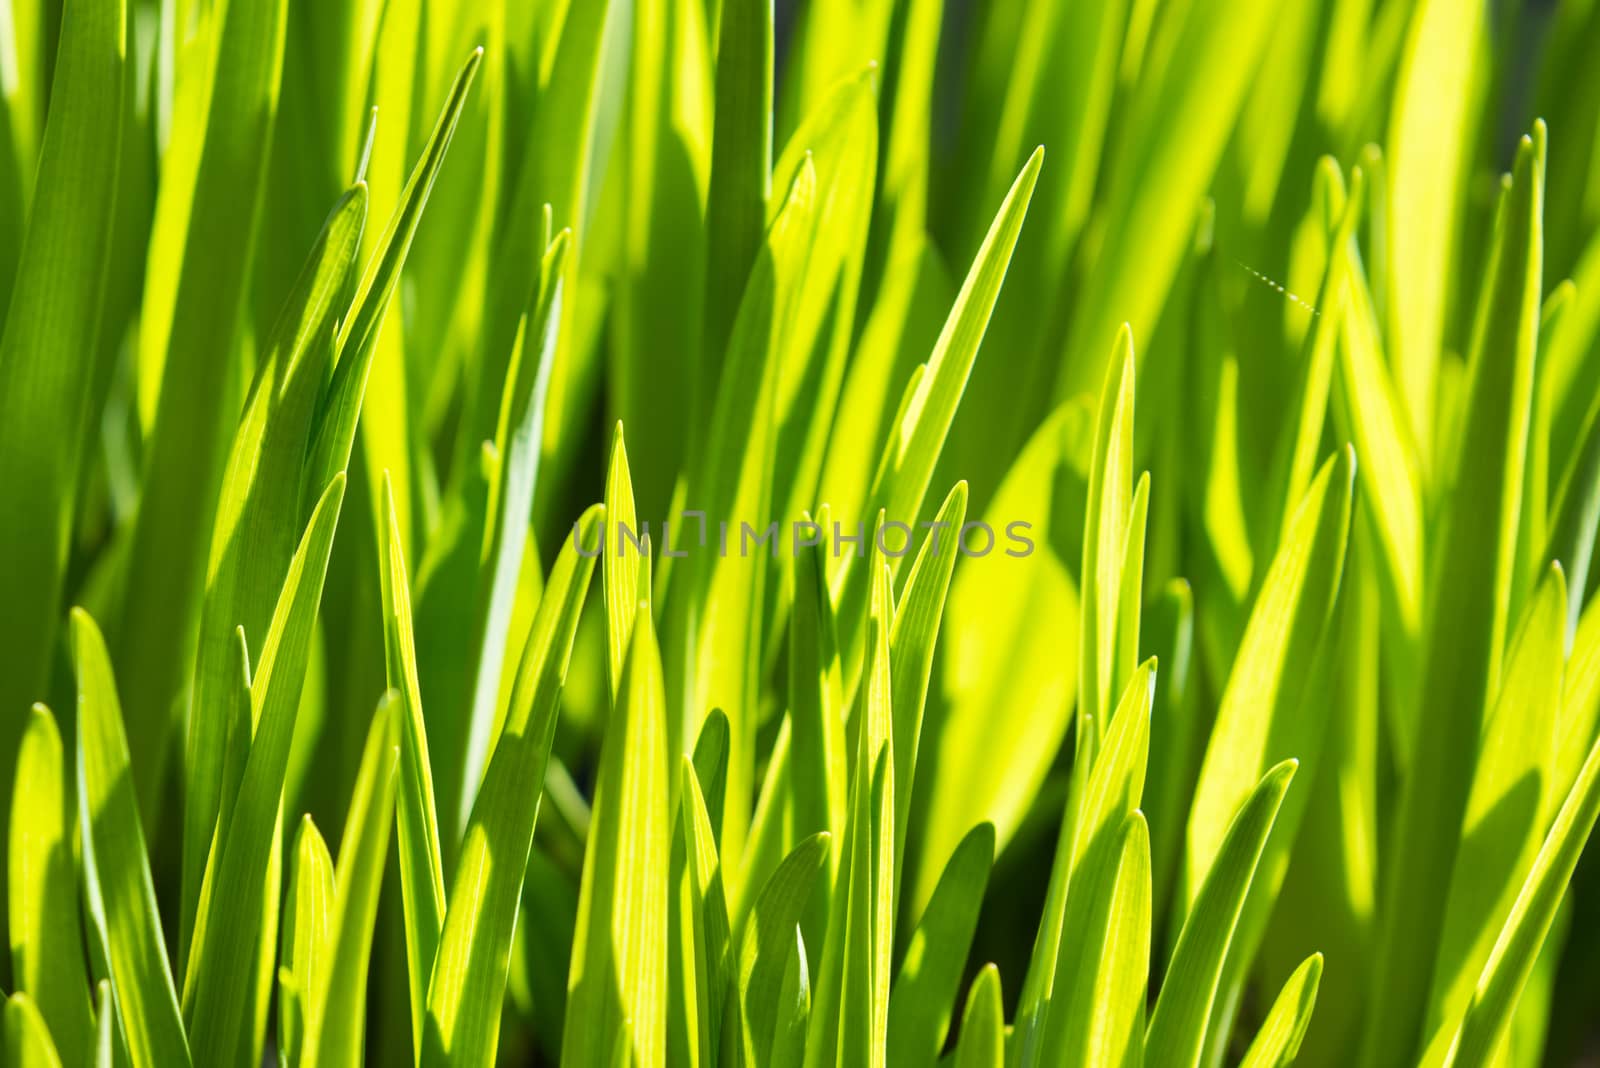 Rich spring green grass, suitable as a background image by nemo269